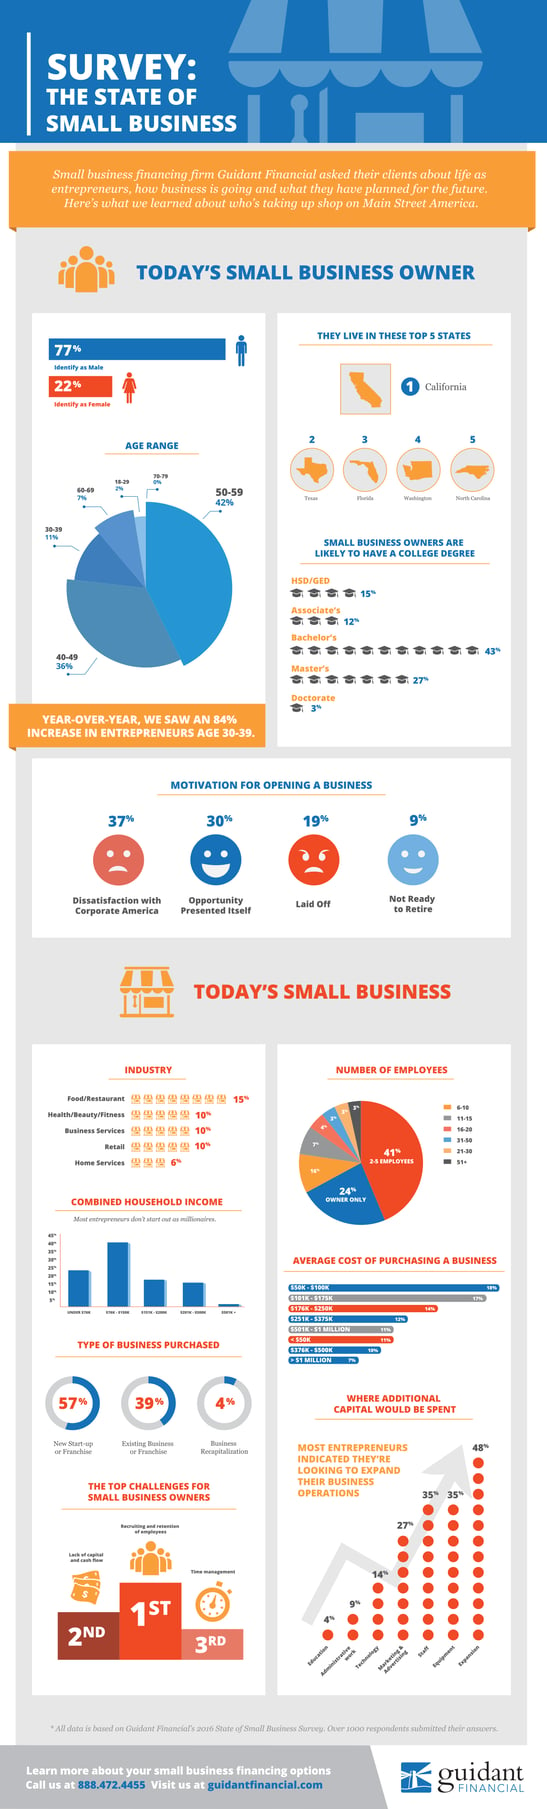 Guidant-Infographic-Survey-That-State-of-Small-Business-in-2016-4.png